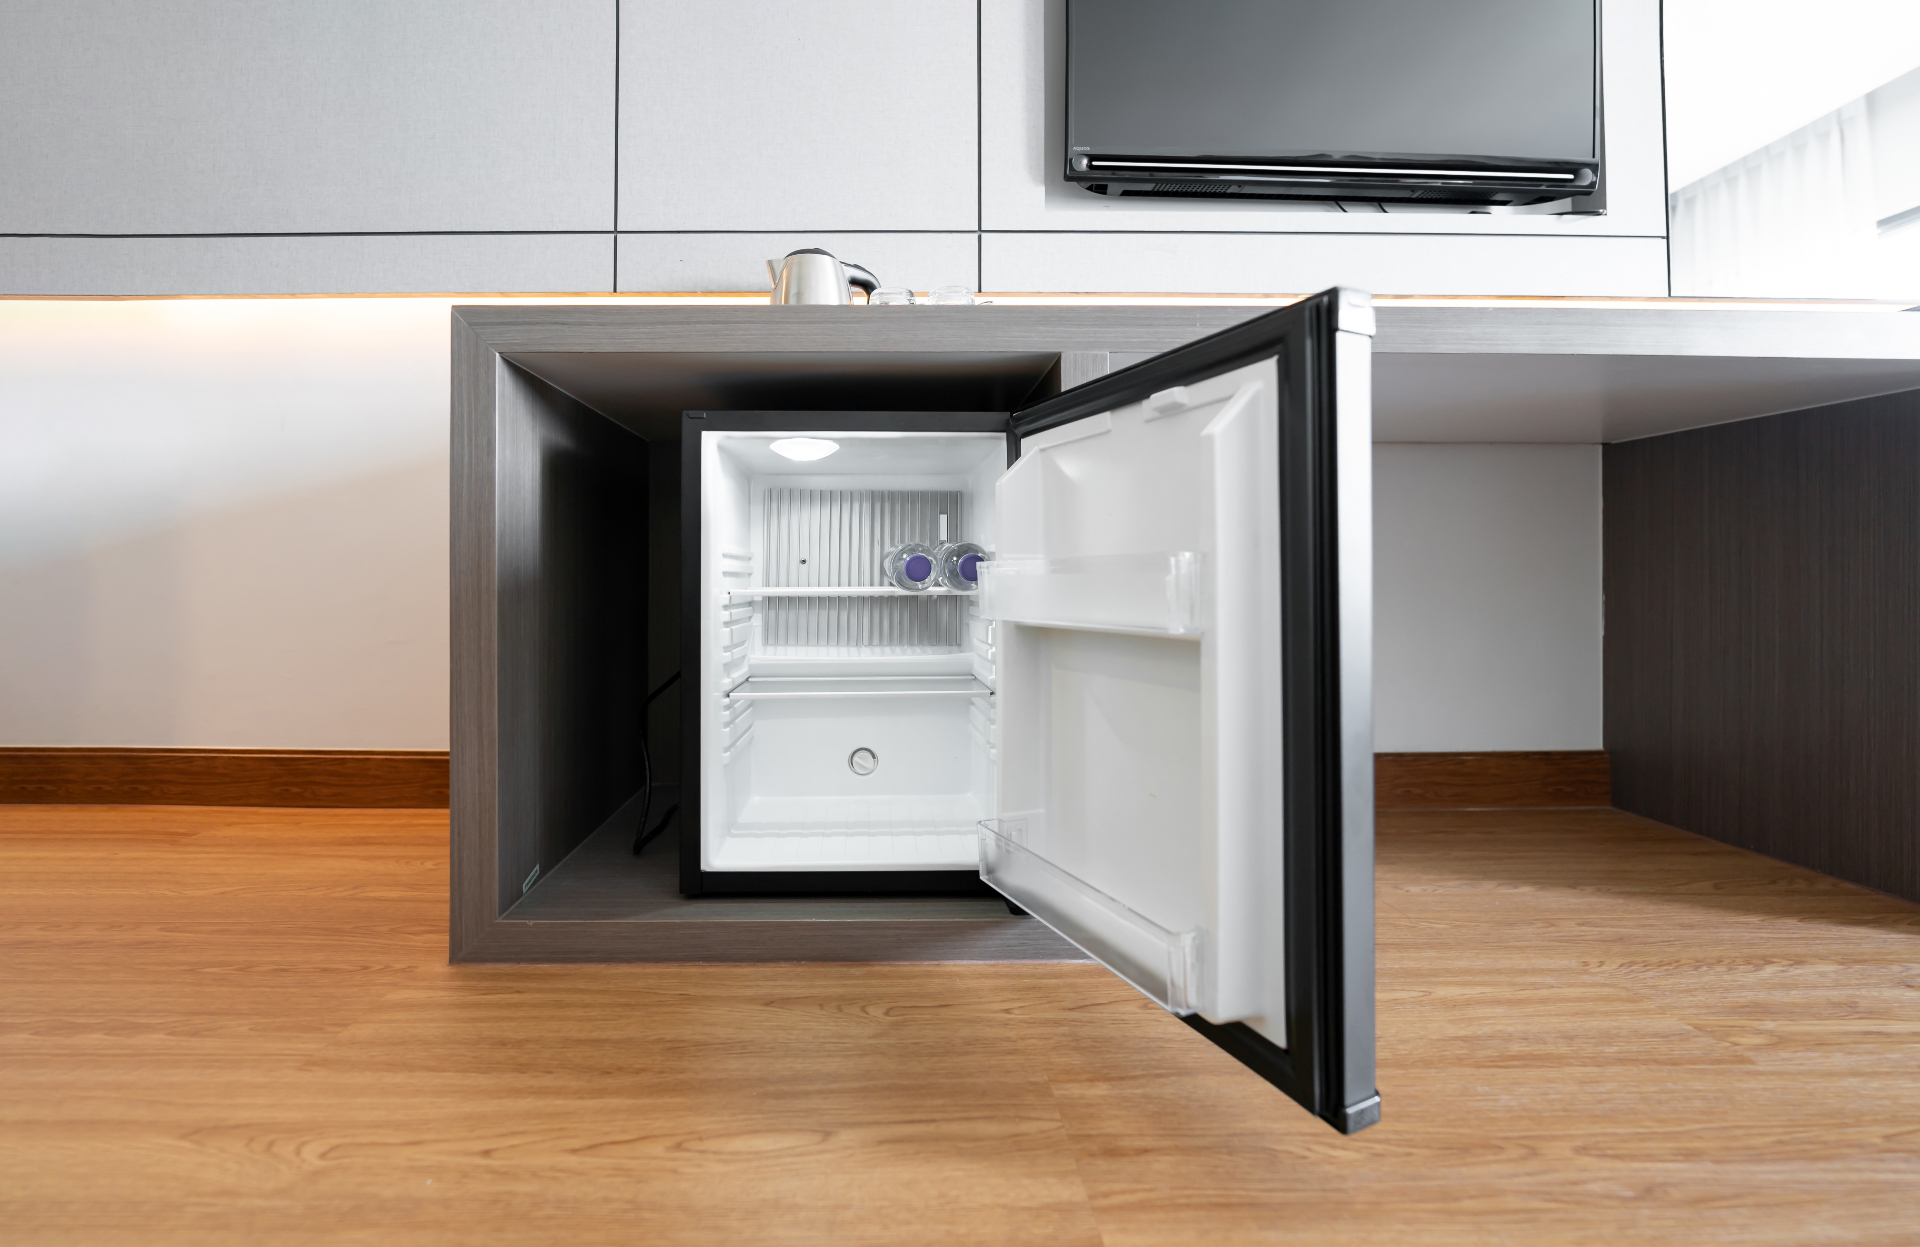 Save Time, Money, and Hassles with Convenient Chest Freezer Dividers